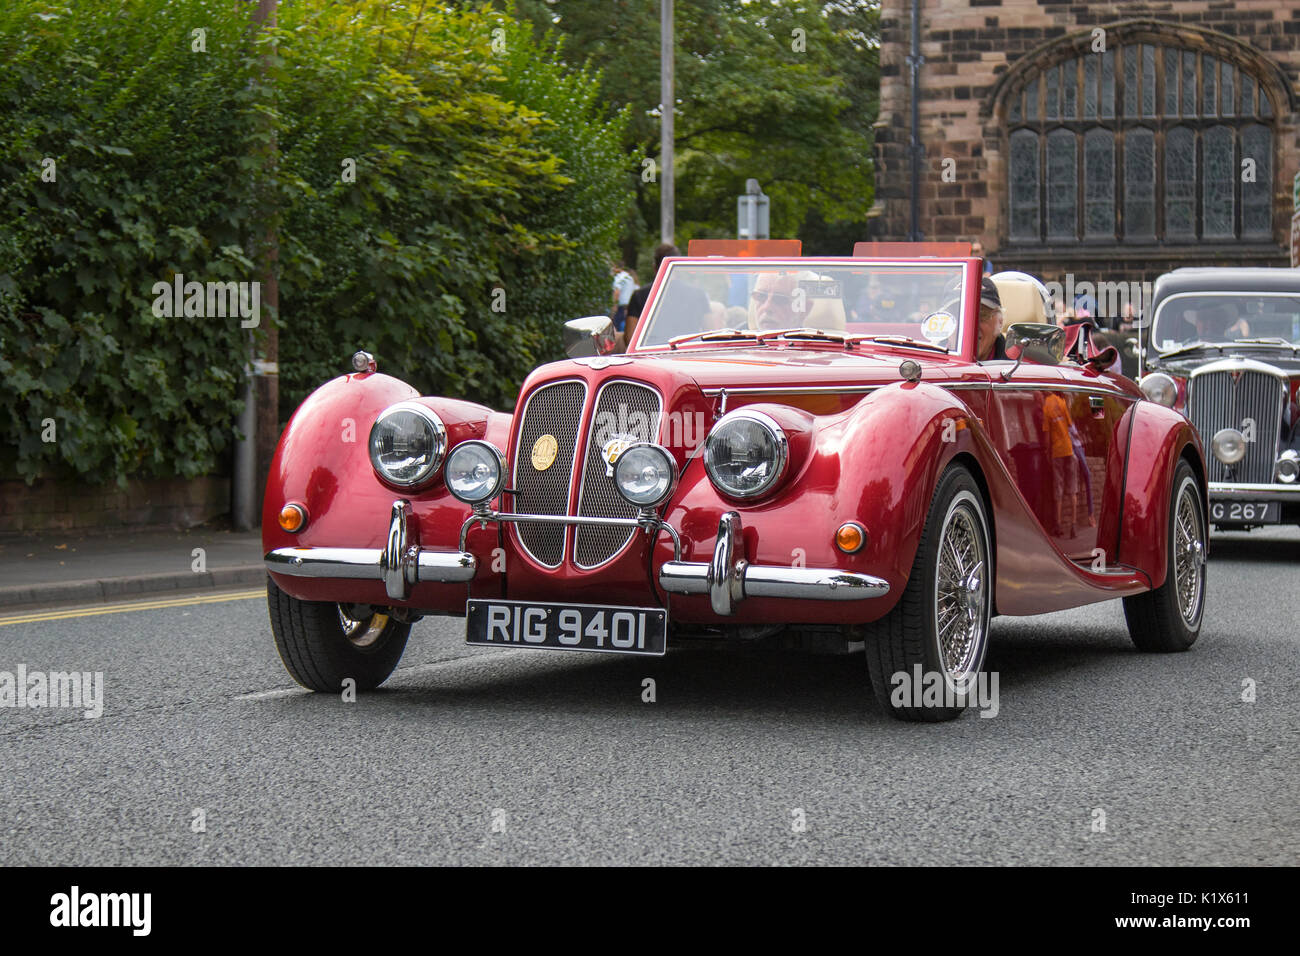 2013 Royale Sabre, 1940s style open top tourer at the 2017 Ormskirk MotorFest on Sunday 27 August. 300 vintage, classic cars from all eras of motoring lined up on town centre streets and in Coronation Park for people to admire. Stock Photo